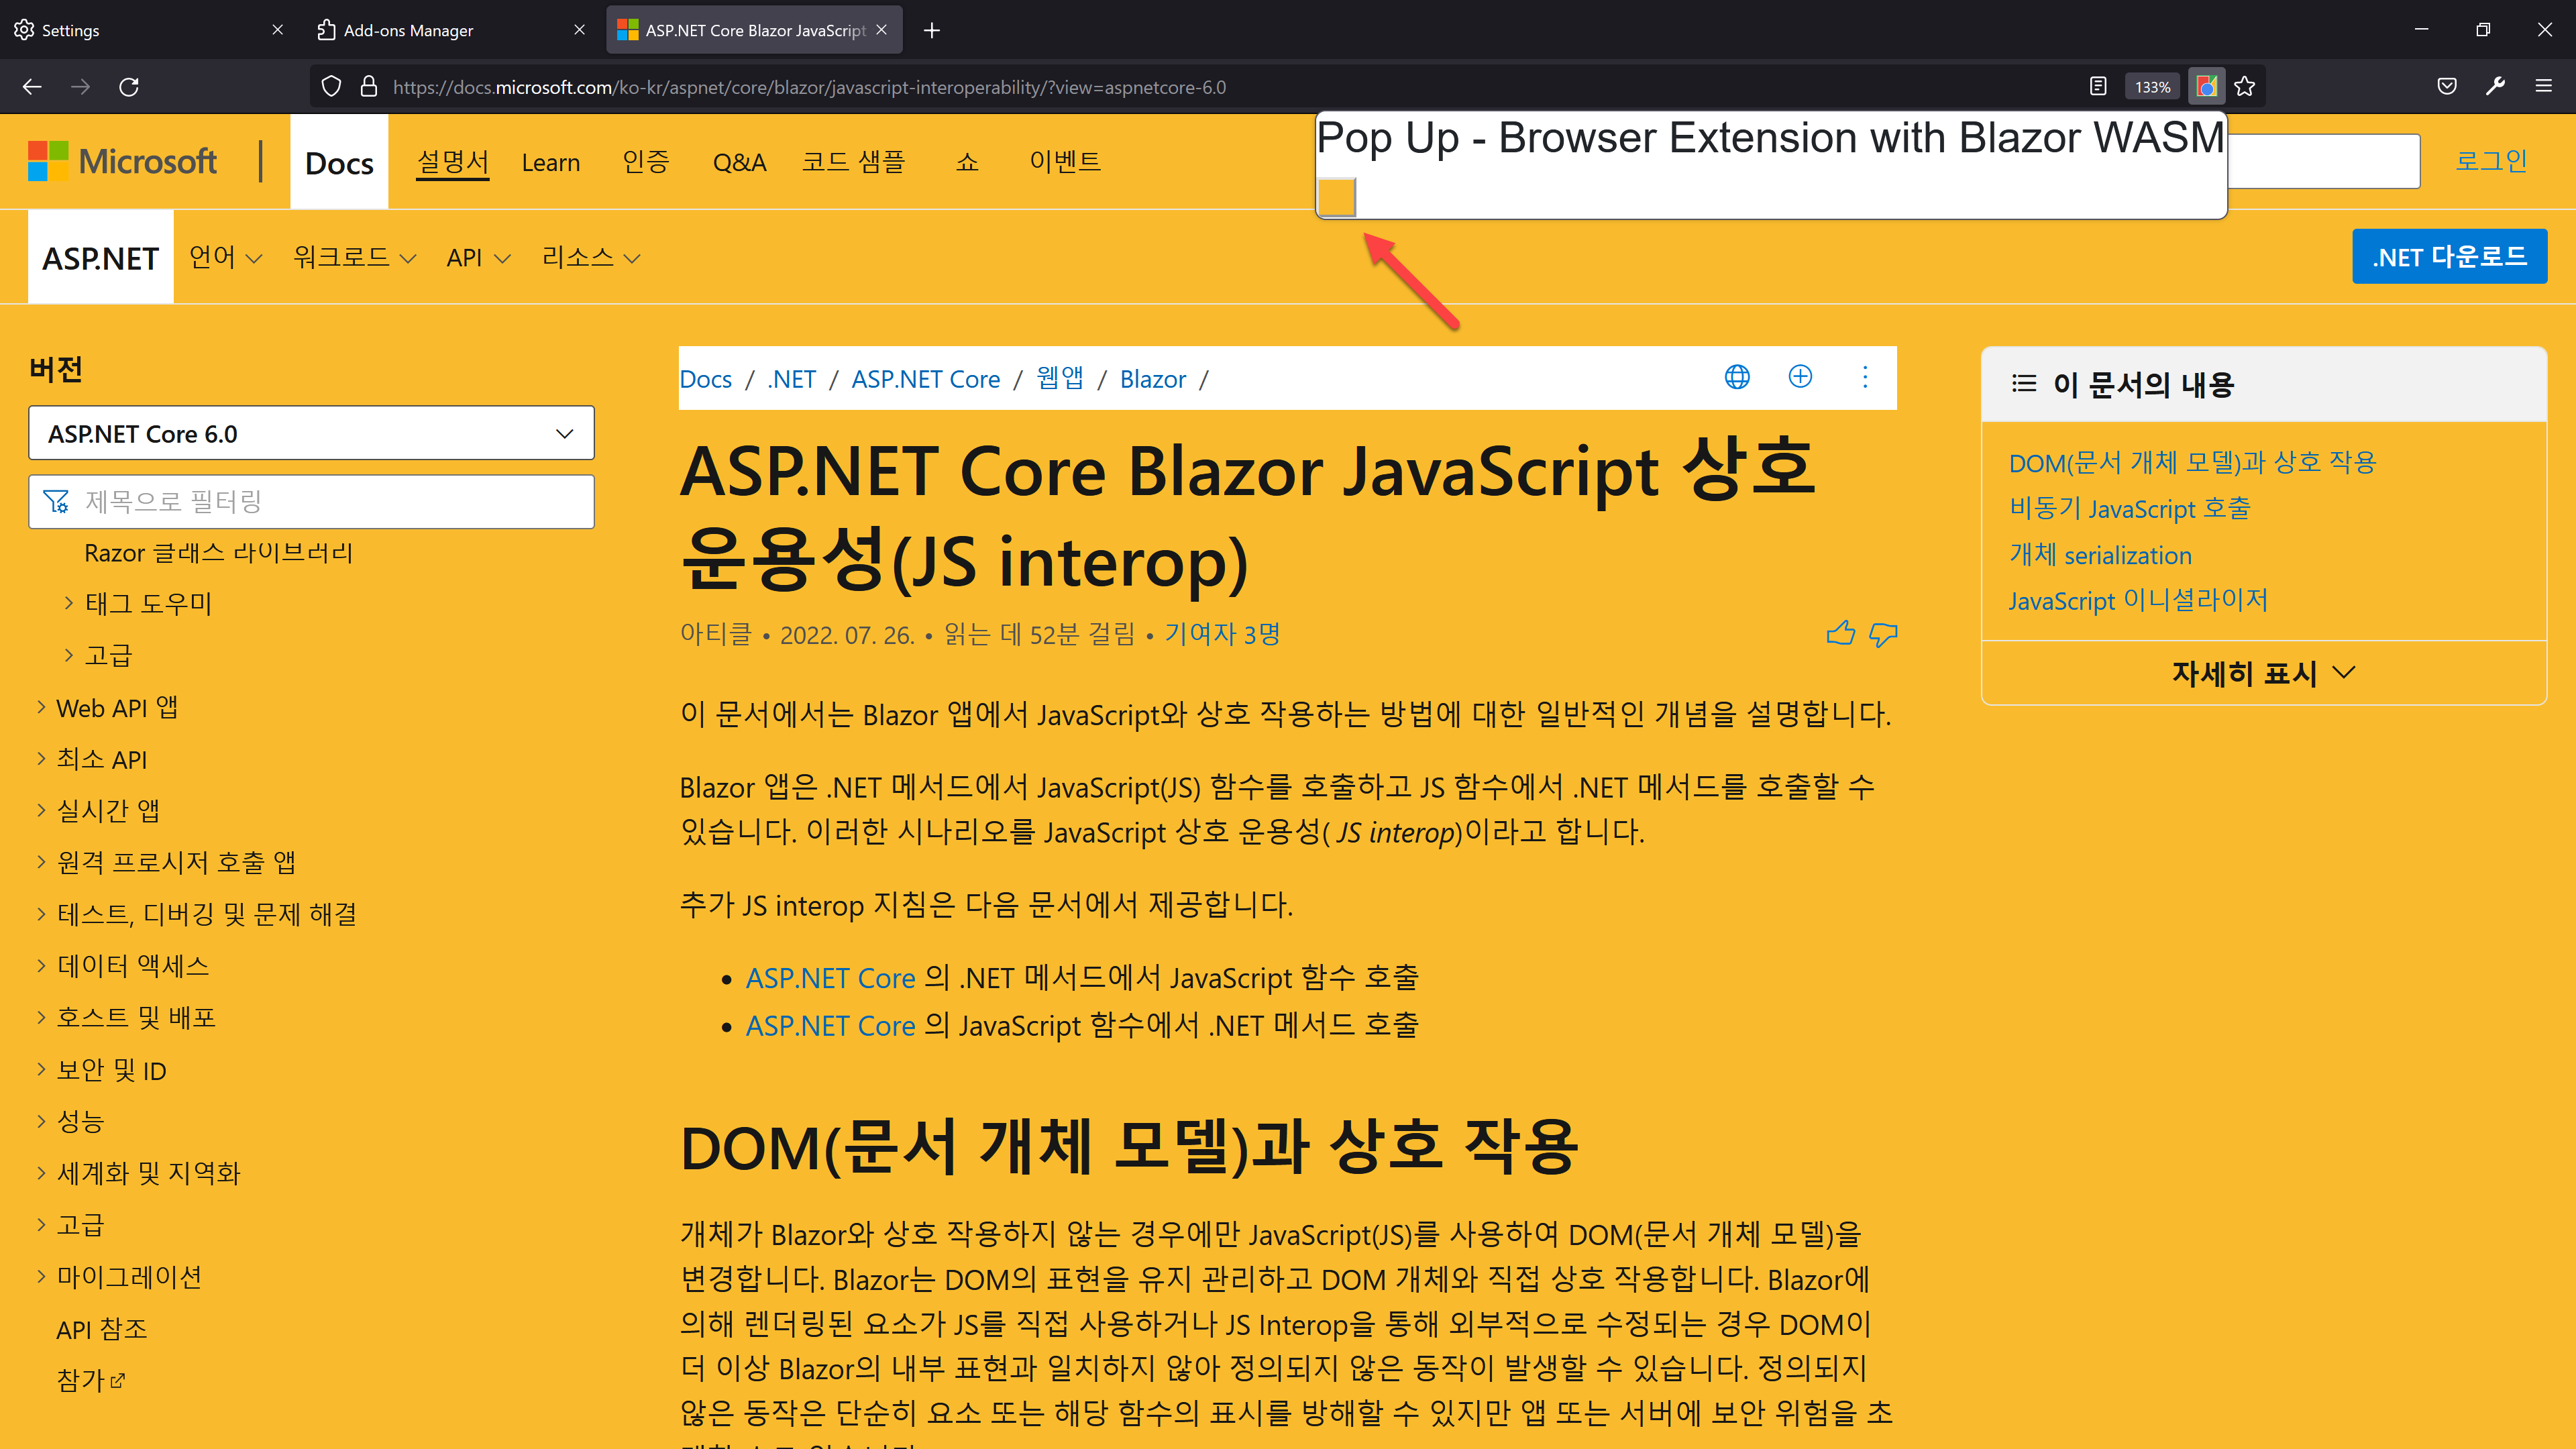 Browser extension on FireFox #2